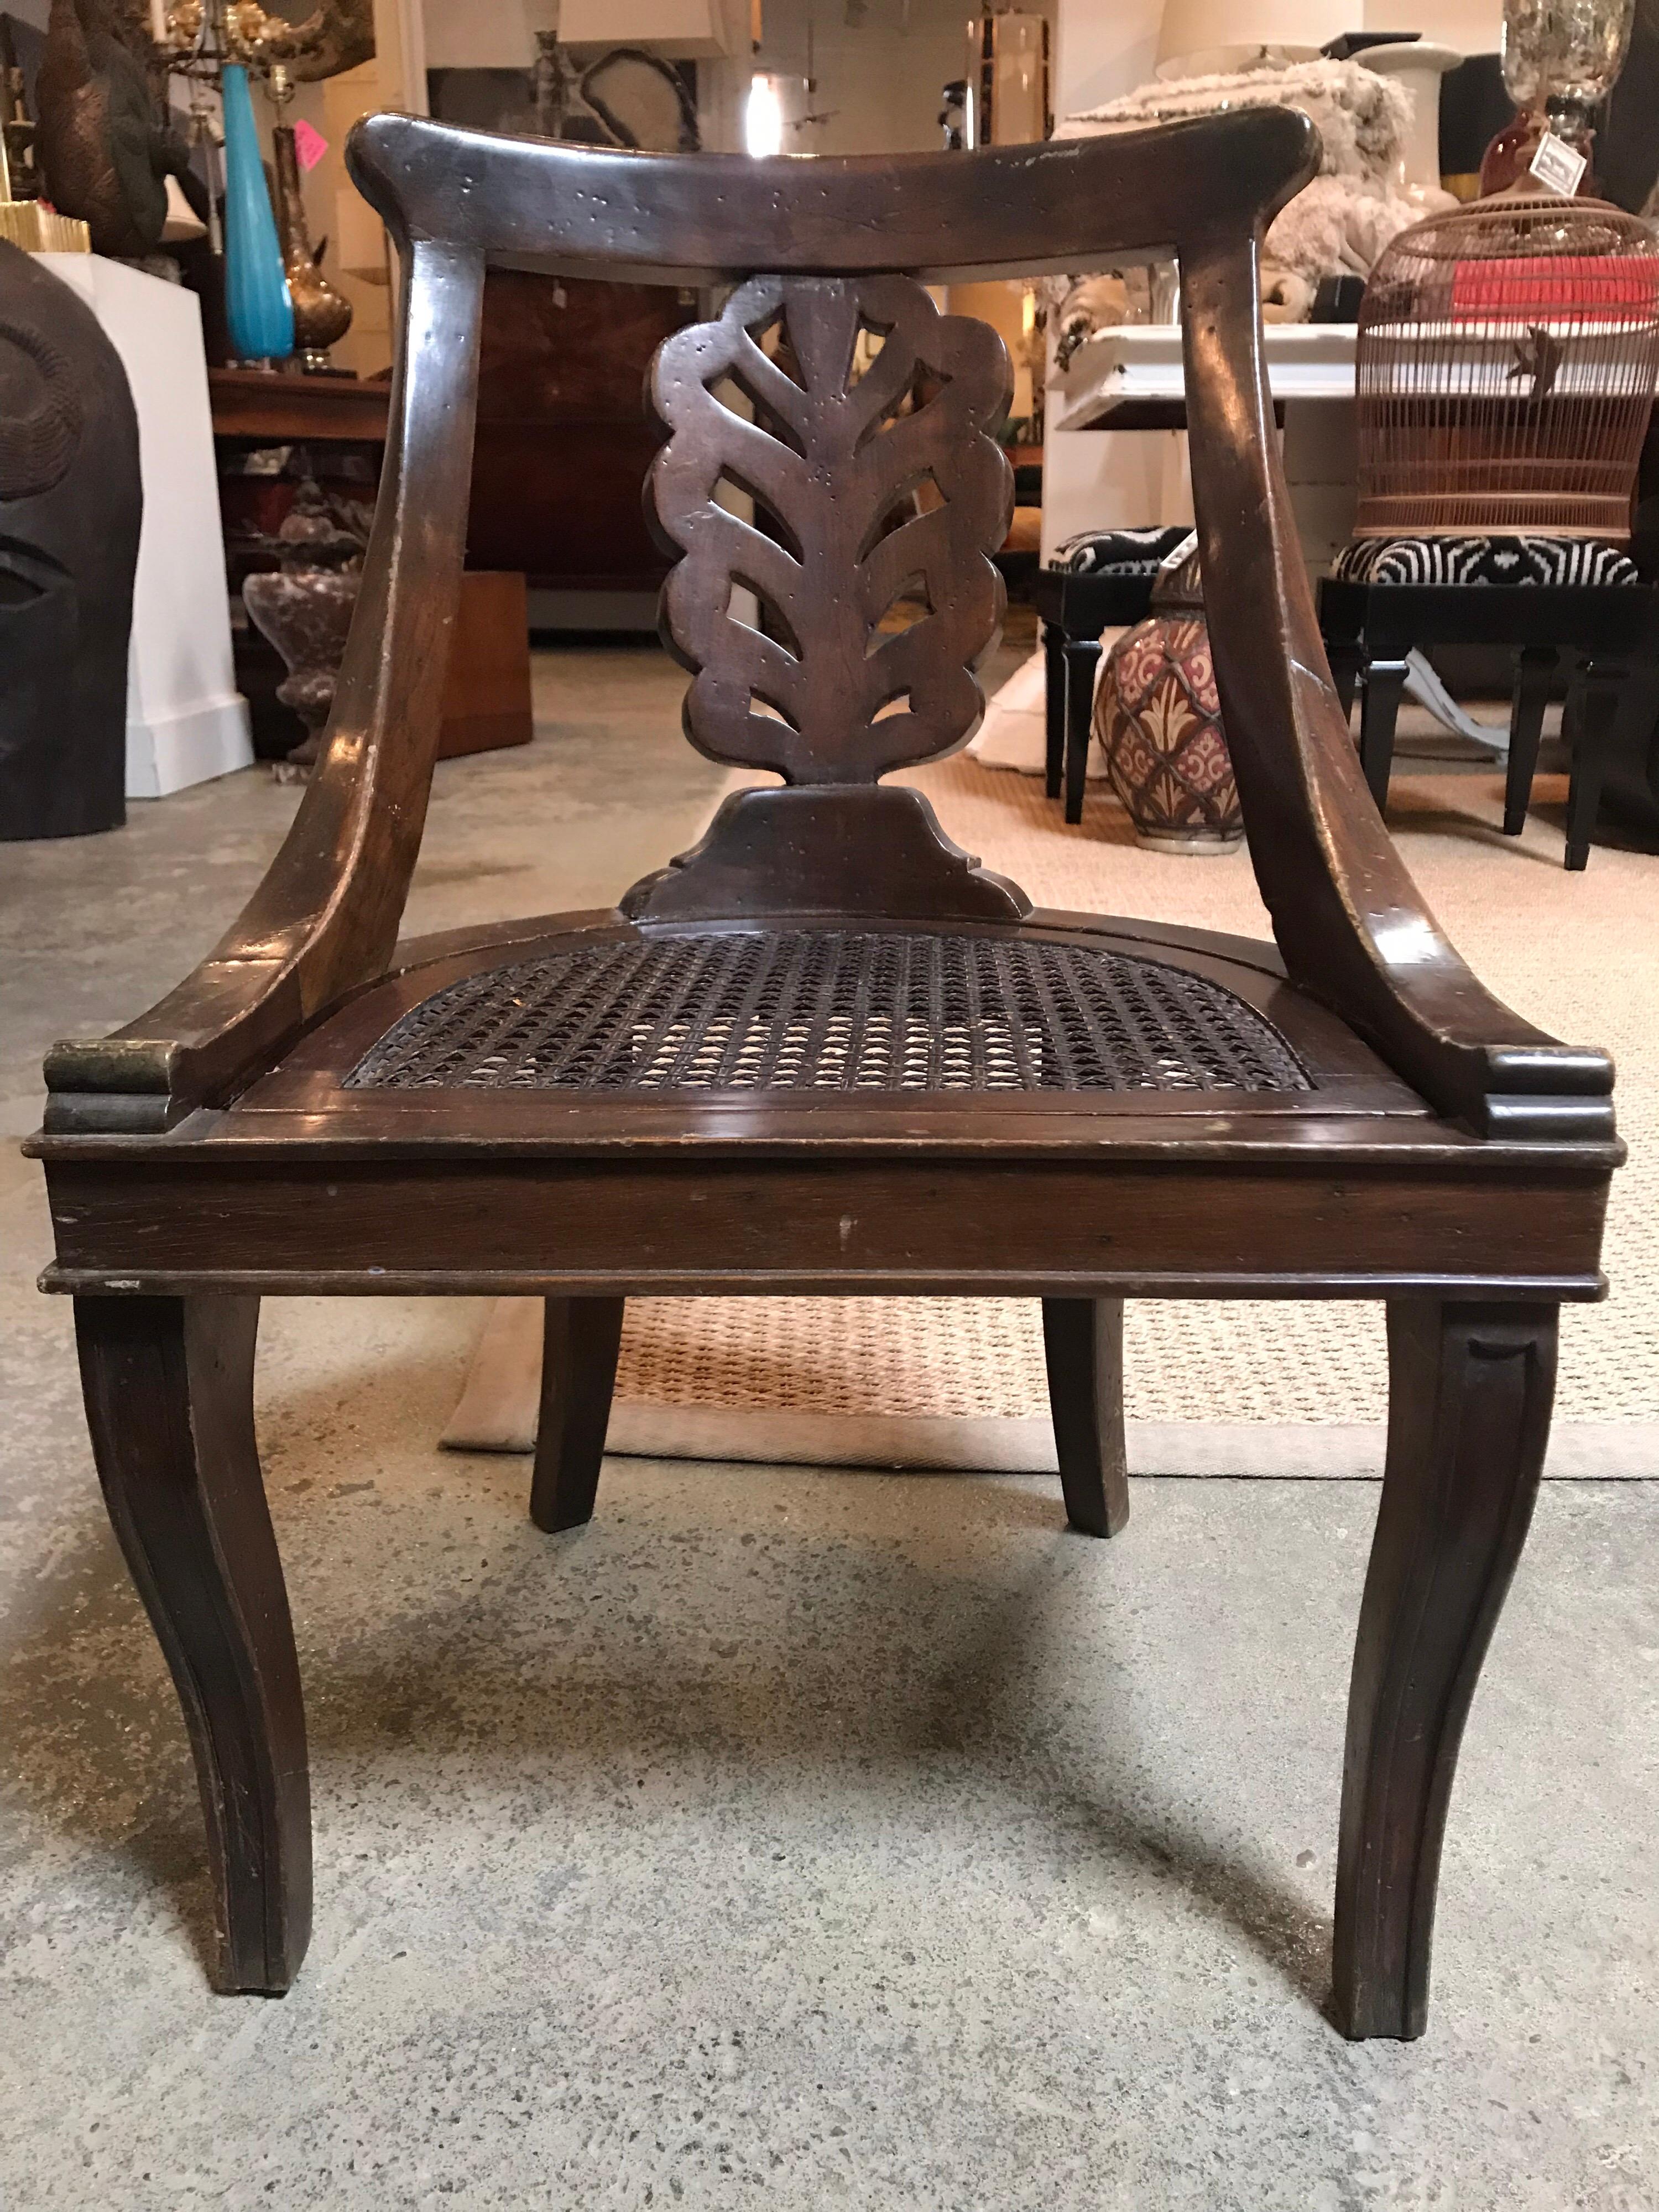 This wooden child's chair was made in Portugal during the 1940s. It is very short and has a removable seat pan, in case the original ever gets damaged.